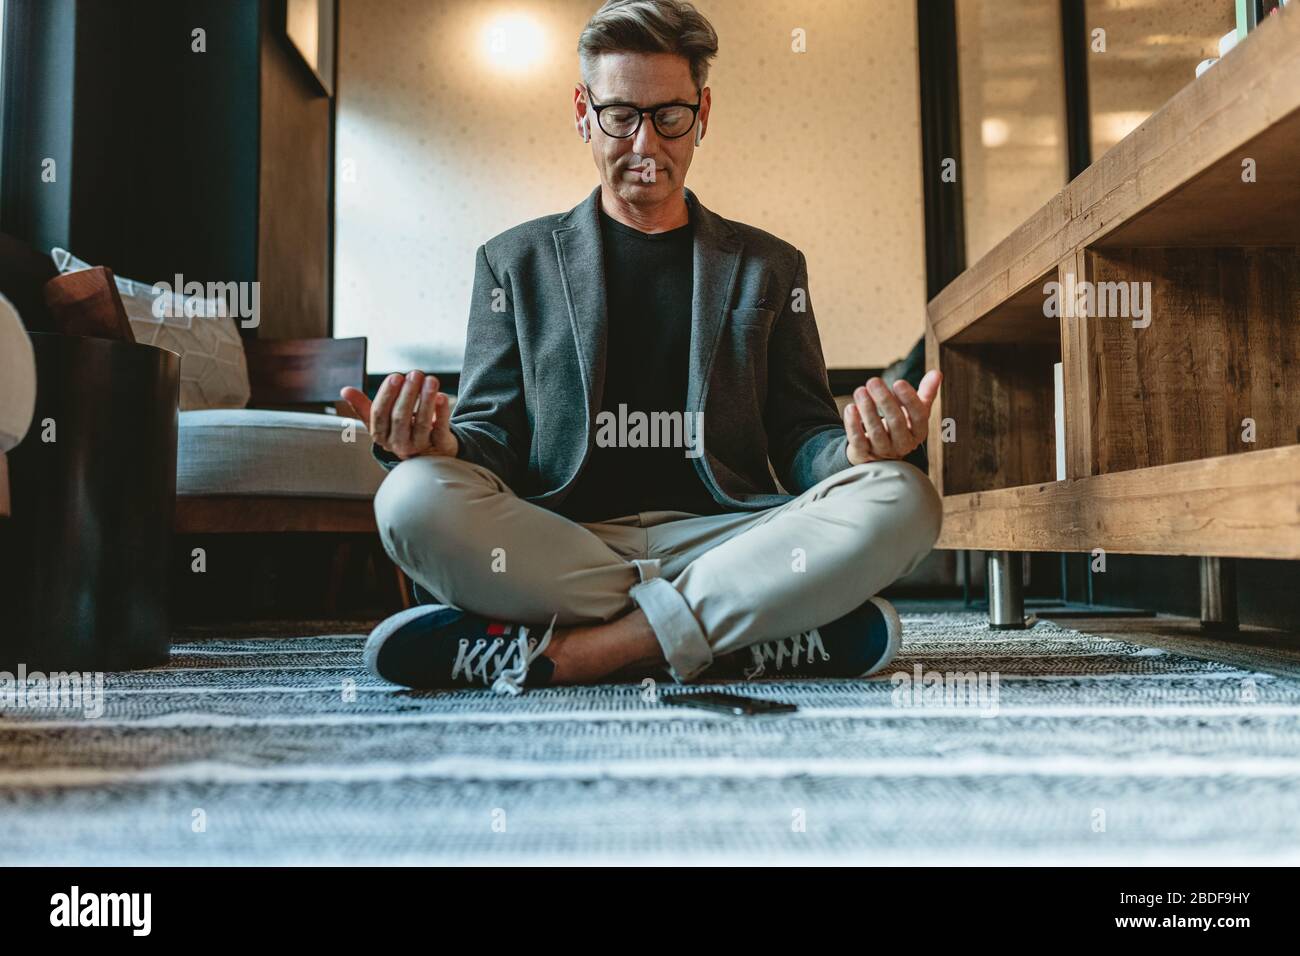 Businessman sitting on floor and meditating in yoga pose. Mature businessman doing relaxation yoga in office lounge. Stock Photo